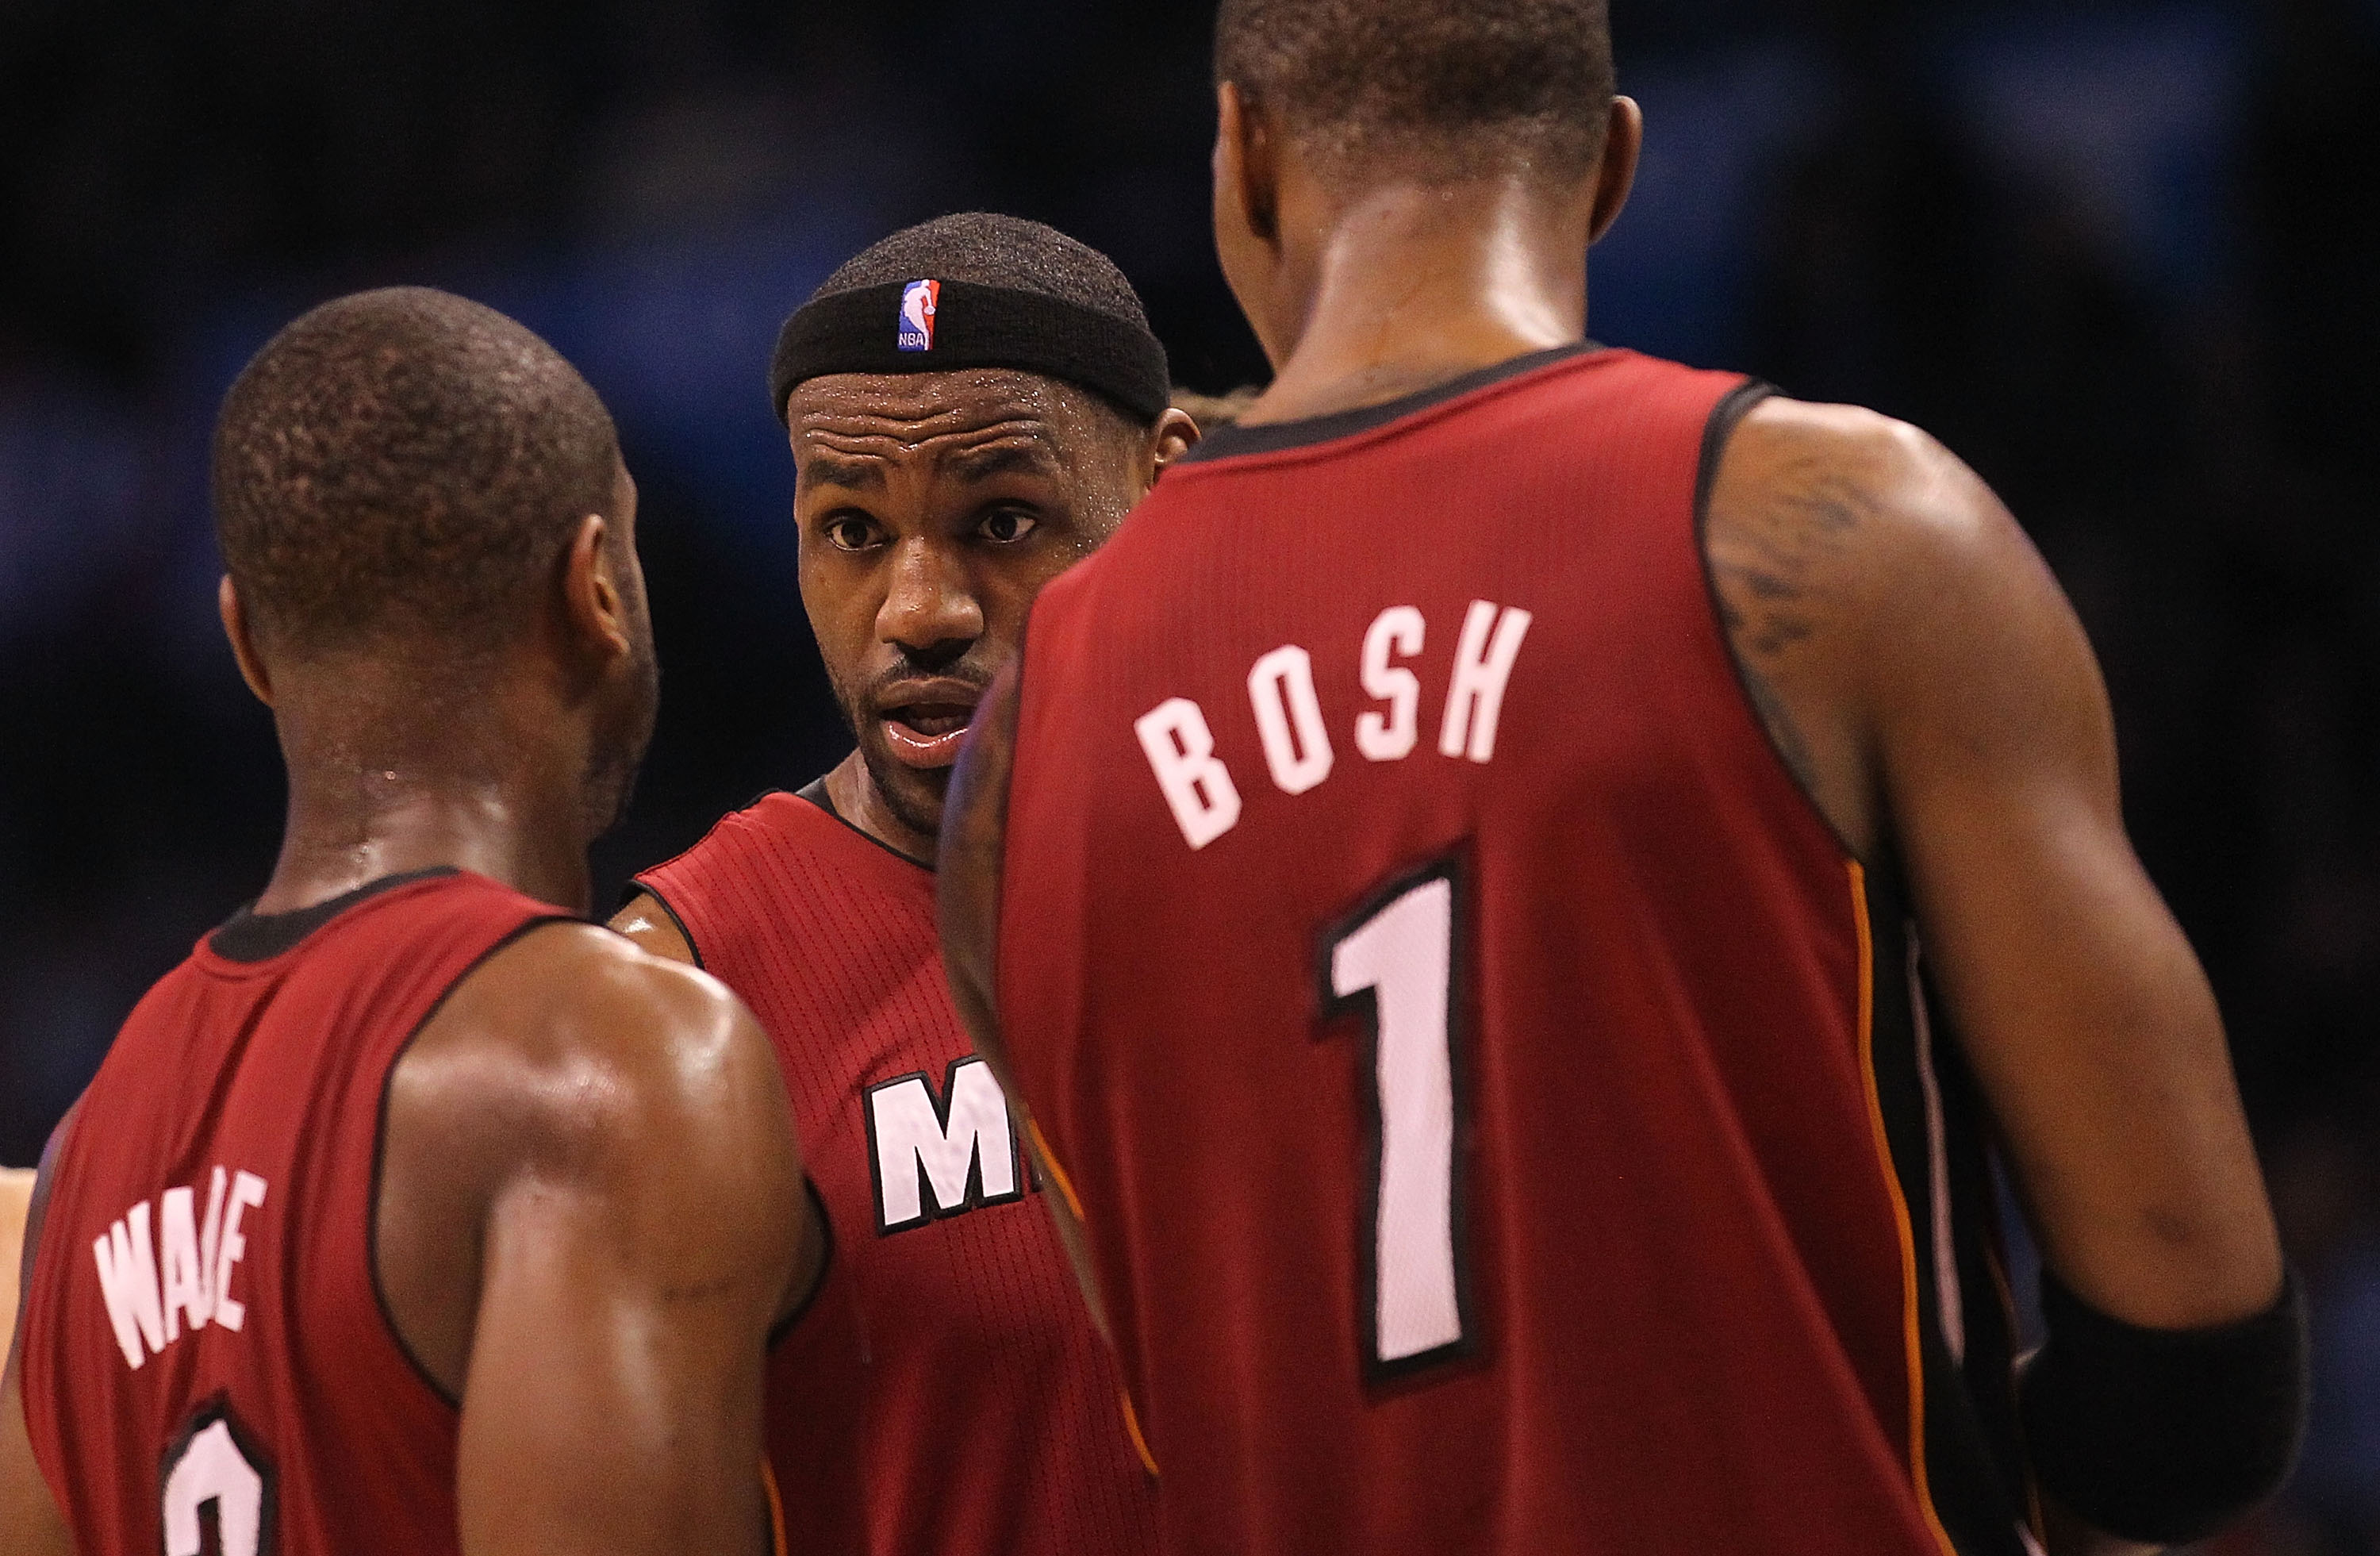 OKLAHOMA CITY, OK - JANUARY 30:  Forward LeBron James #6 talks with Dwyane Wade #3 and Chris Bosh #1 of the Miami Heat during play against the Oklahoma City Thunder at Ford Center on January 30, 2011 in Oklahoma City, Oklahoma.  NOTE TO USER: User express